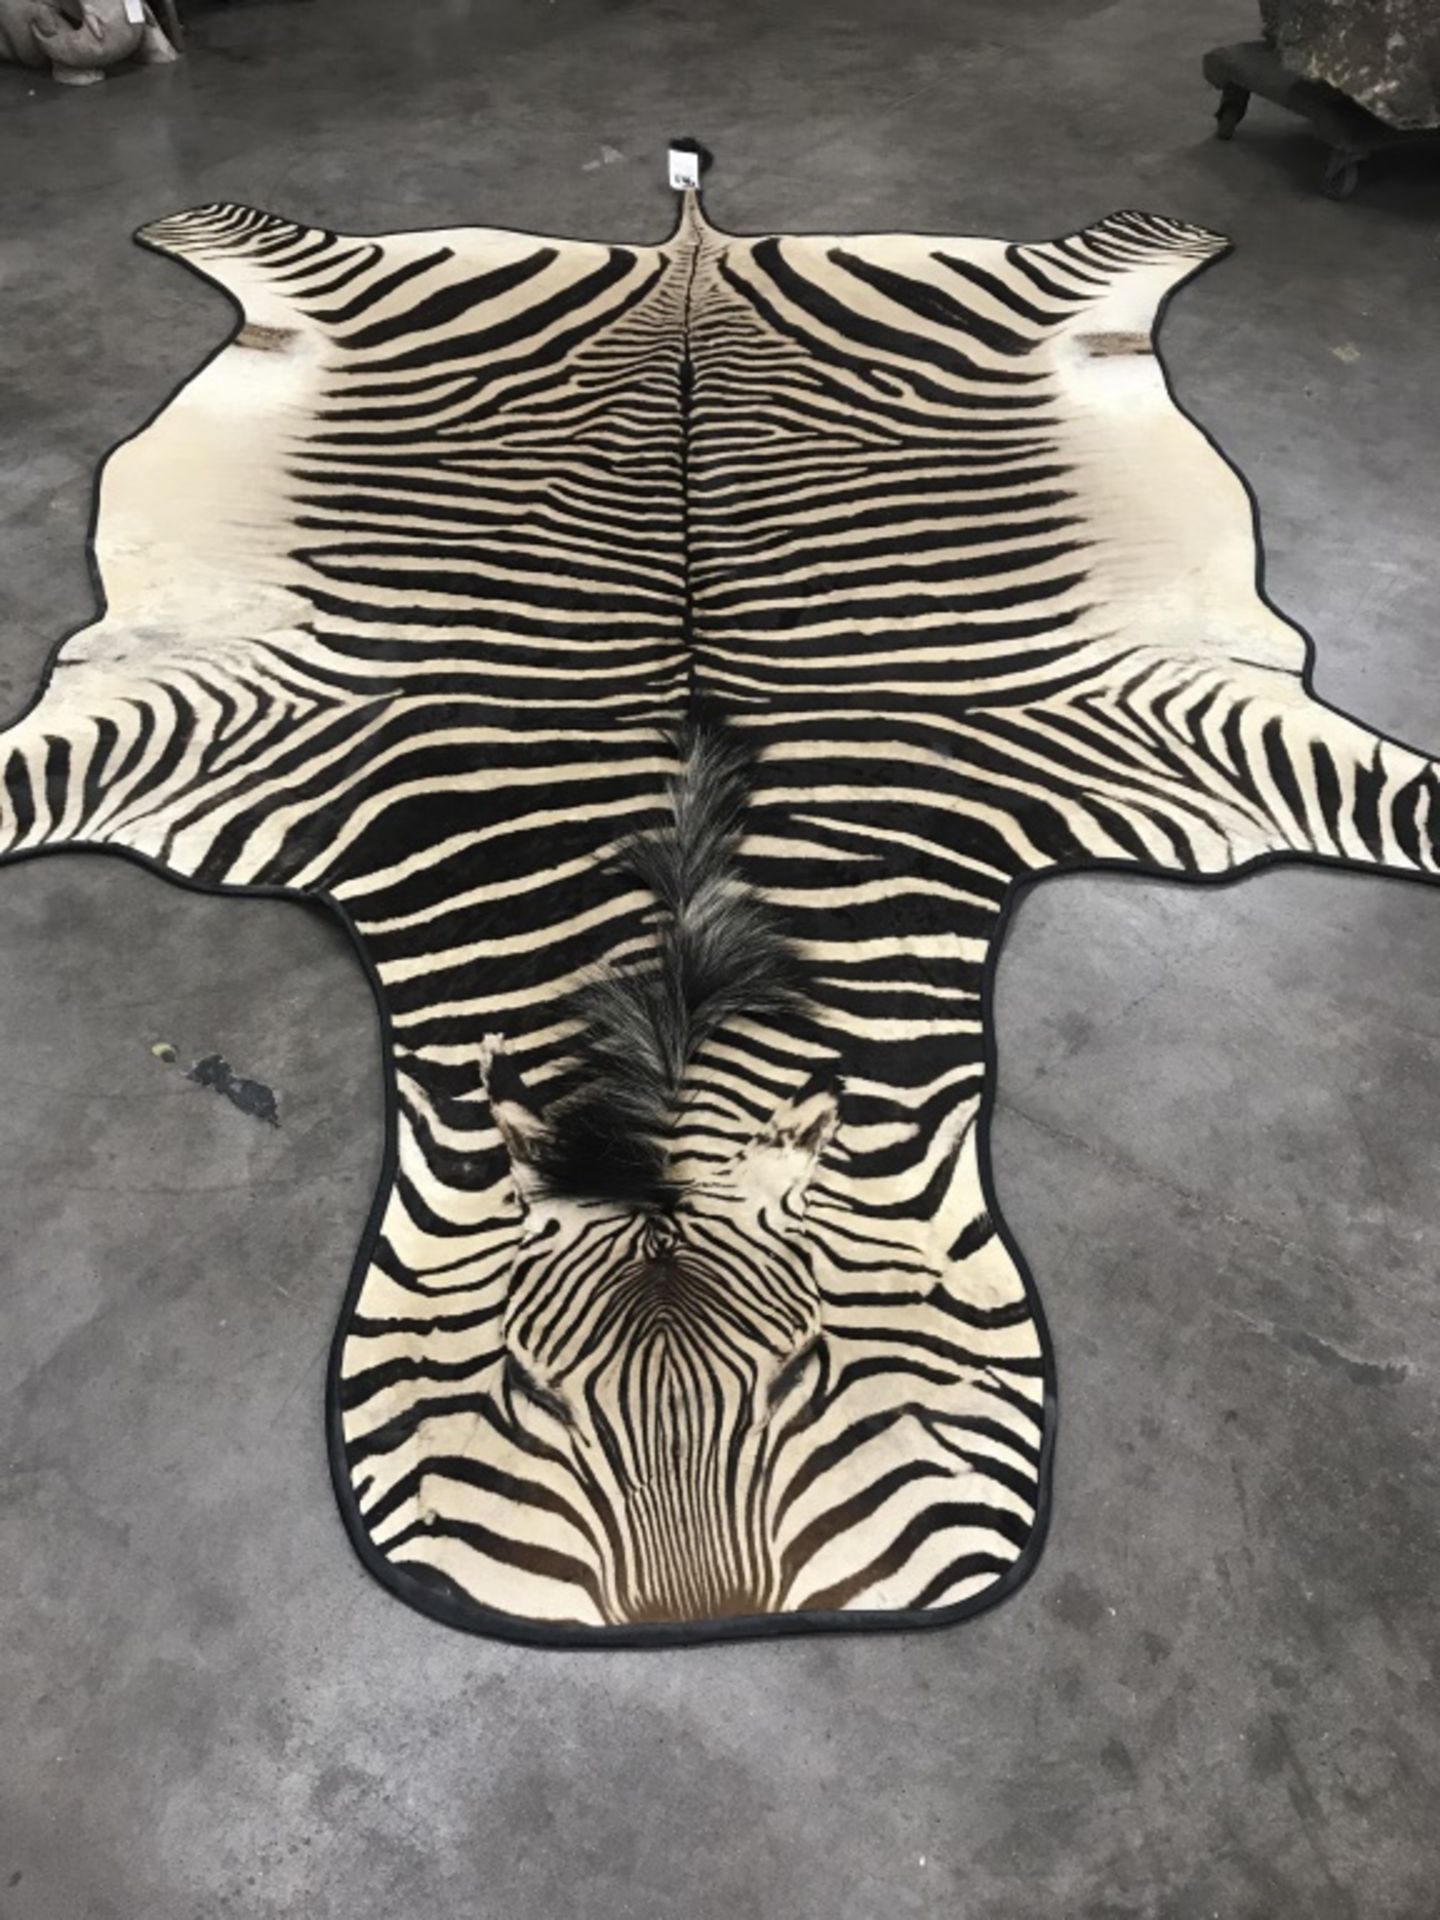 Very Nice Zebra Rug (TX Res. Only)